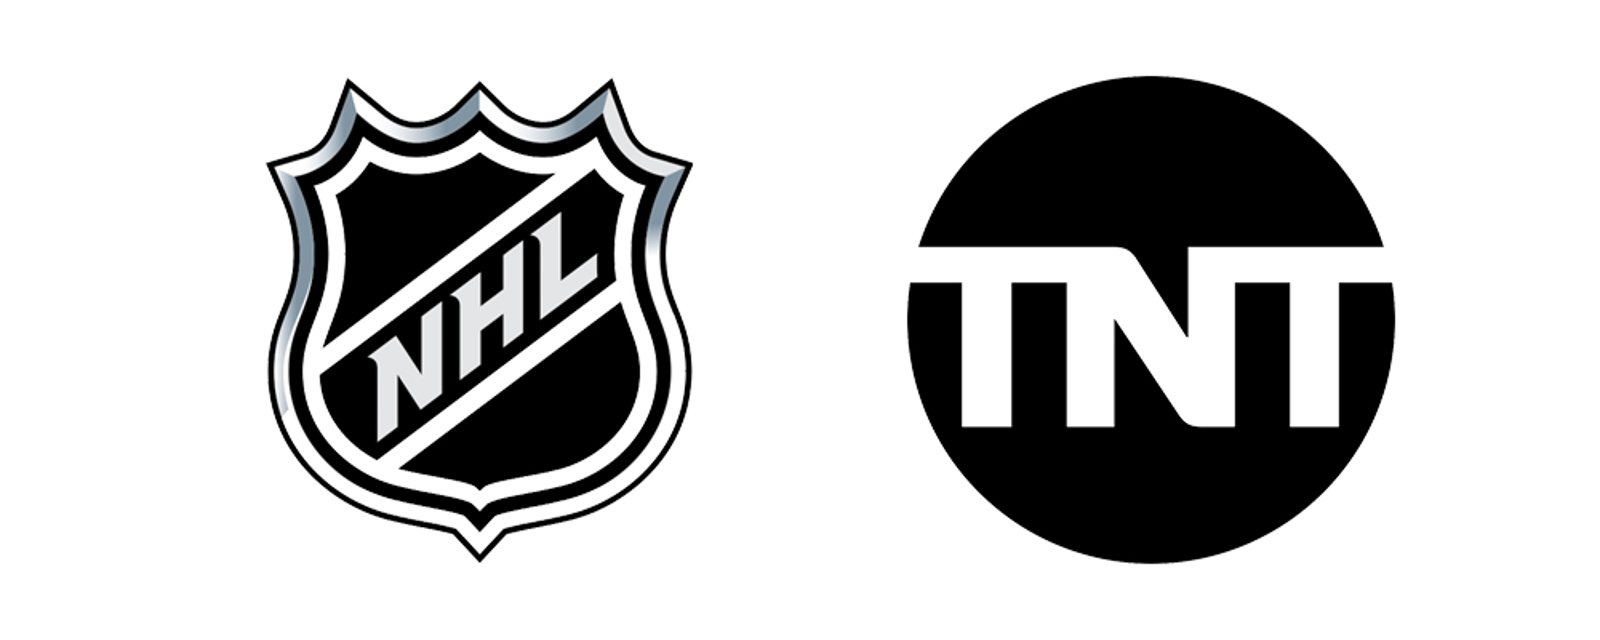 TNT botches NHL announcement, confuses Andrew Ference for Connor McDavid